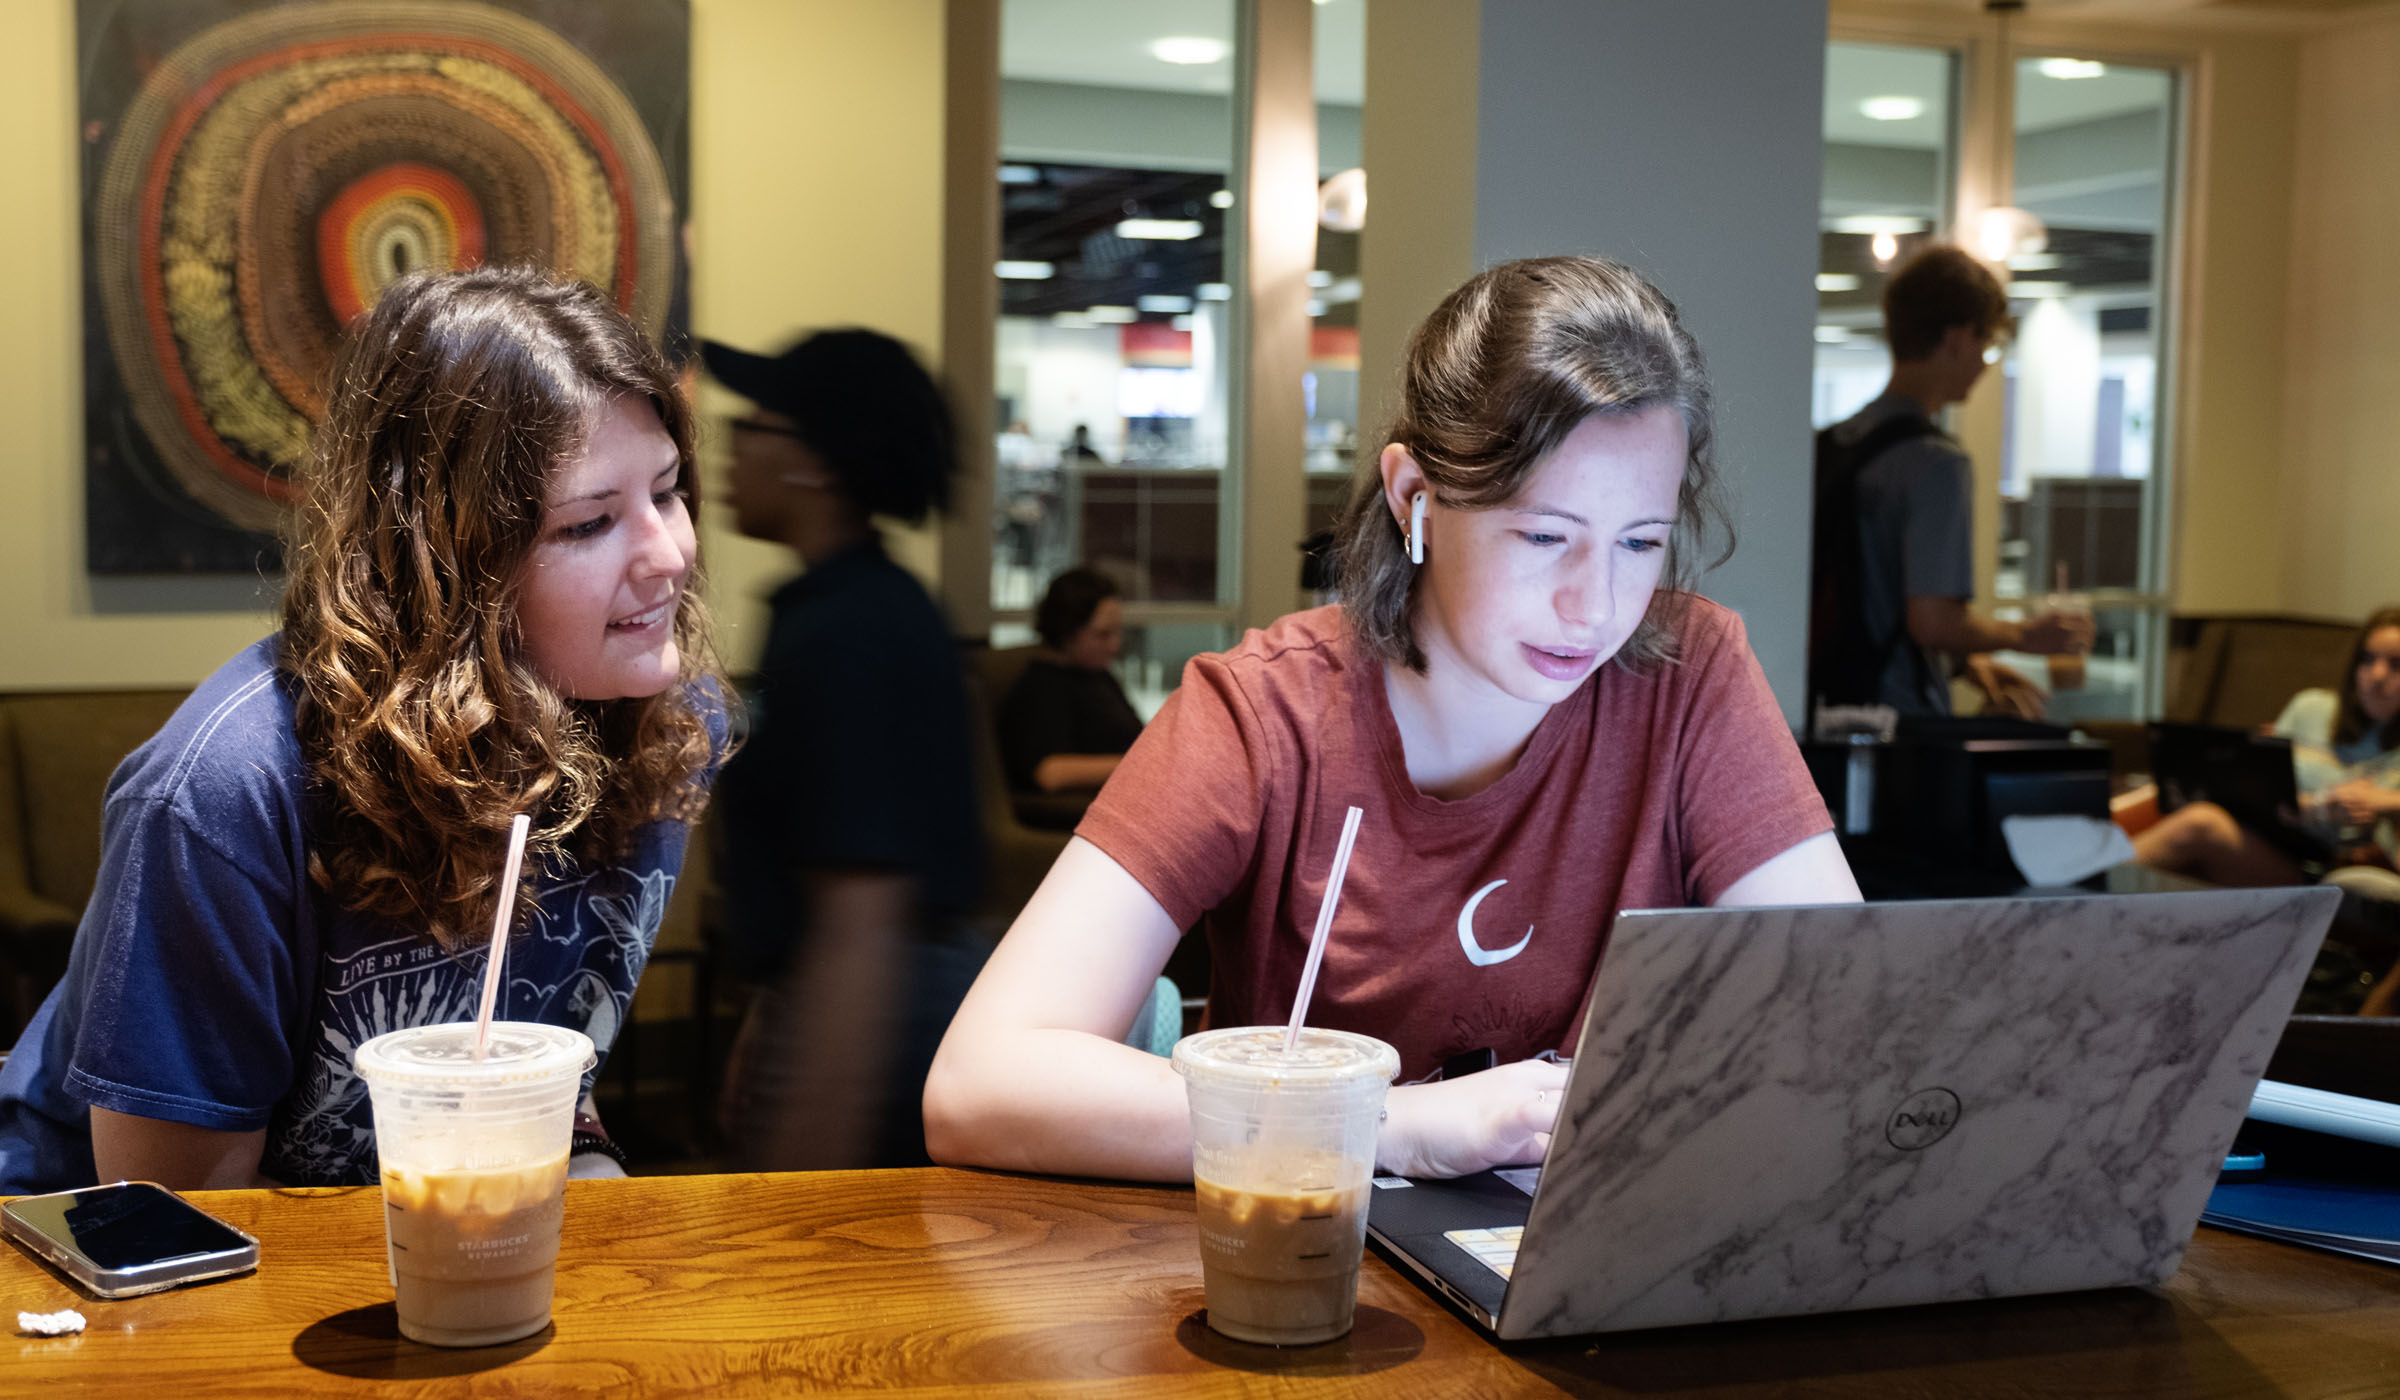 Two female students sit at the Starbucks wooden table with iced beverage, with the student on the right looking at her laptop and the other looking on. Starbucks is bustling behind them.